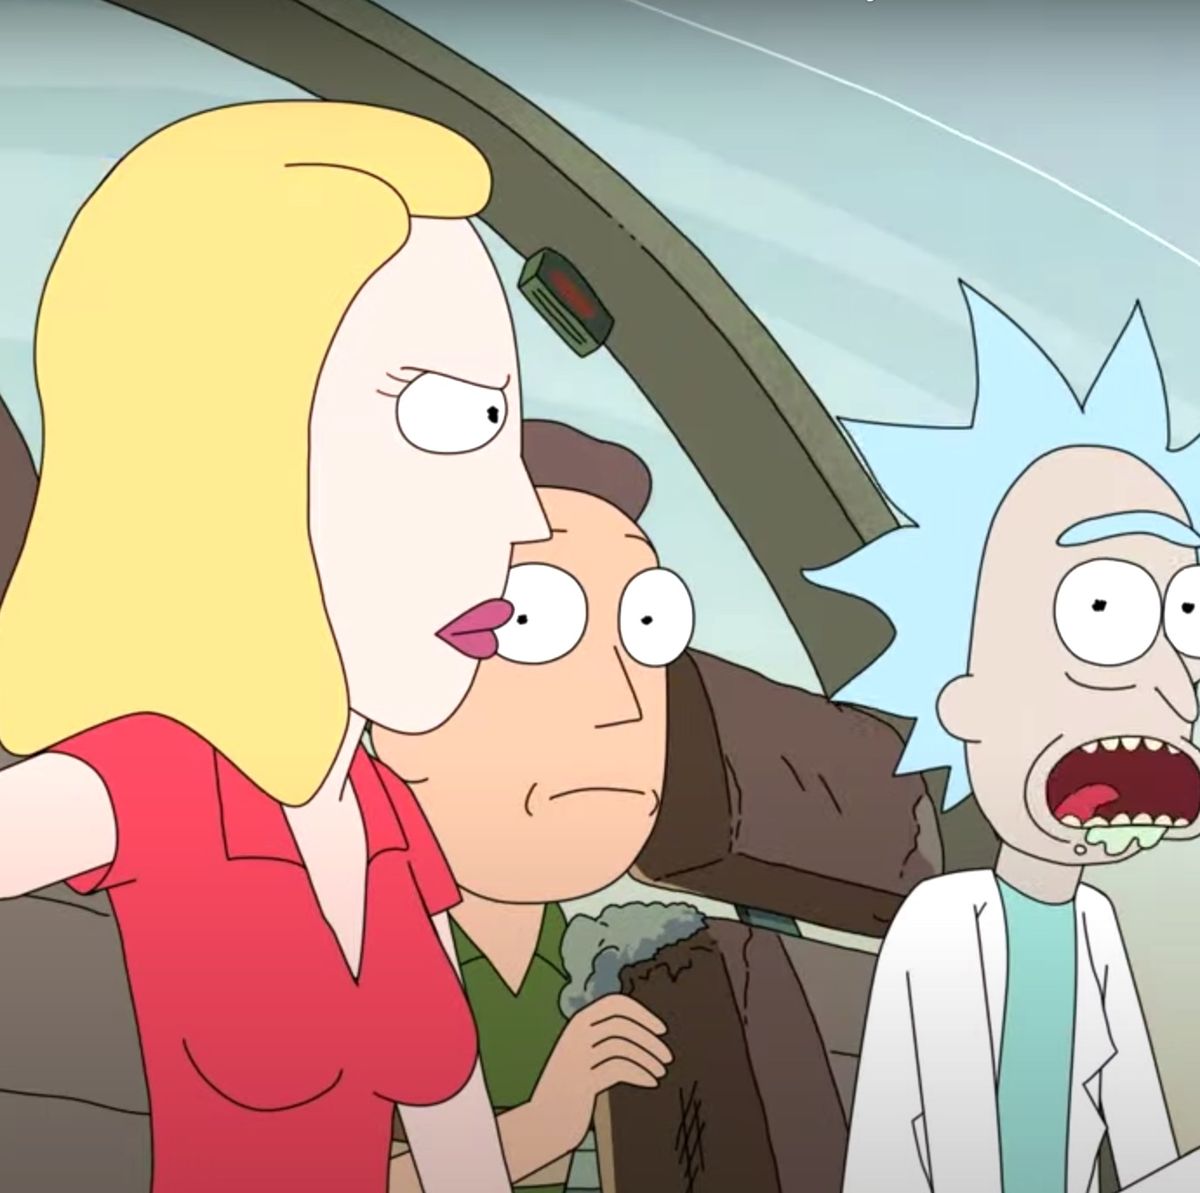 Rick and Morty's season 4 finale sets up big changes for season 5